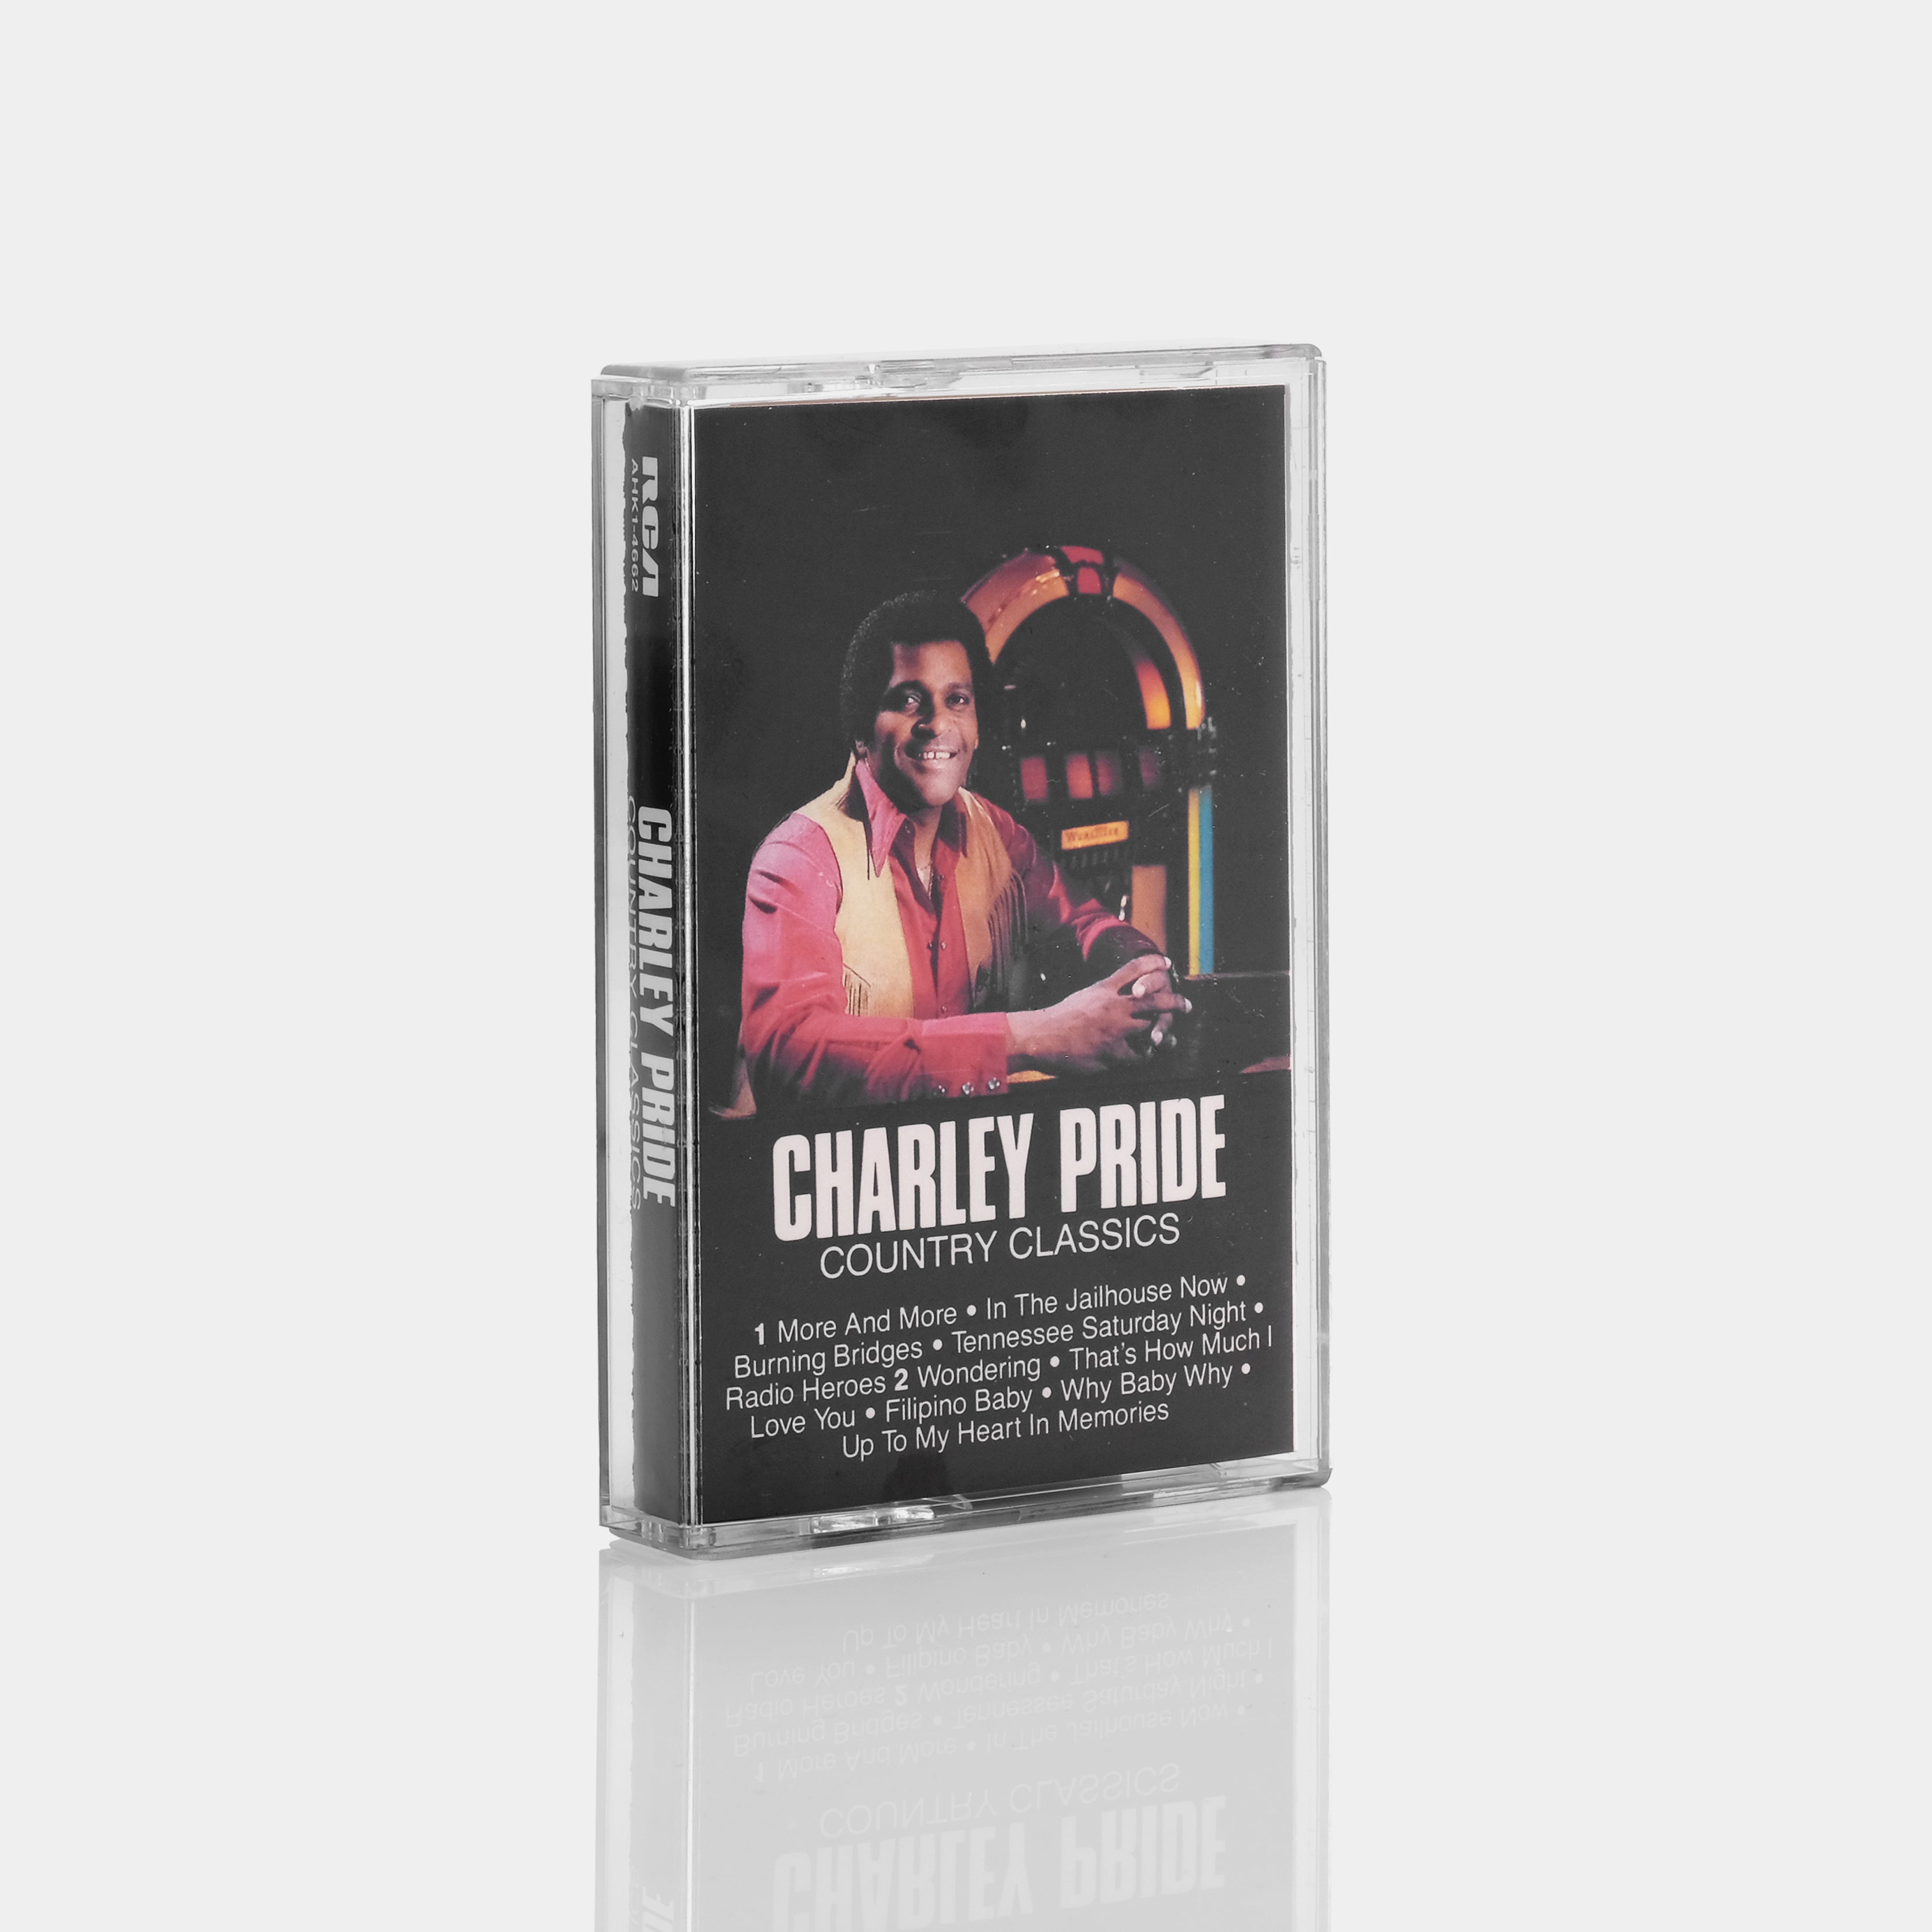 Charley Pride - Country Classics Cassette Tape